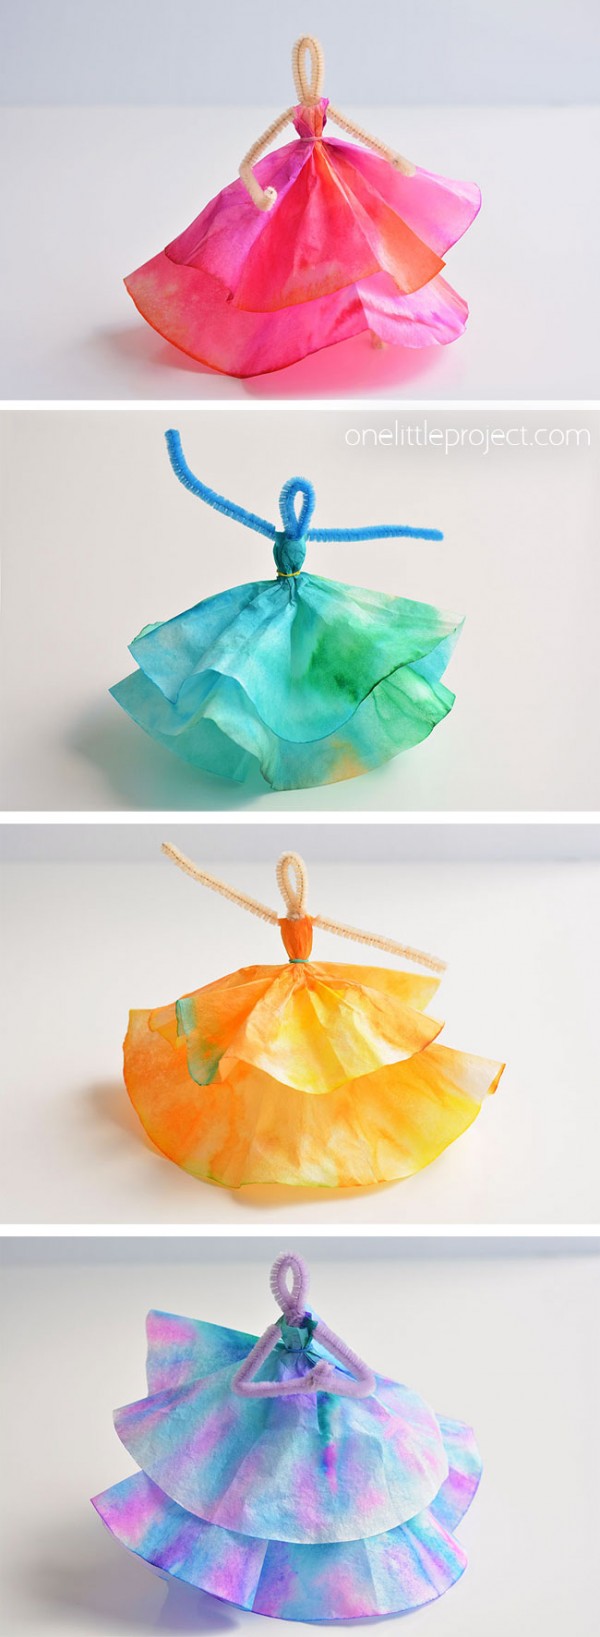 How to Make Coffee Filter Dancers